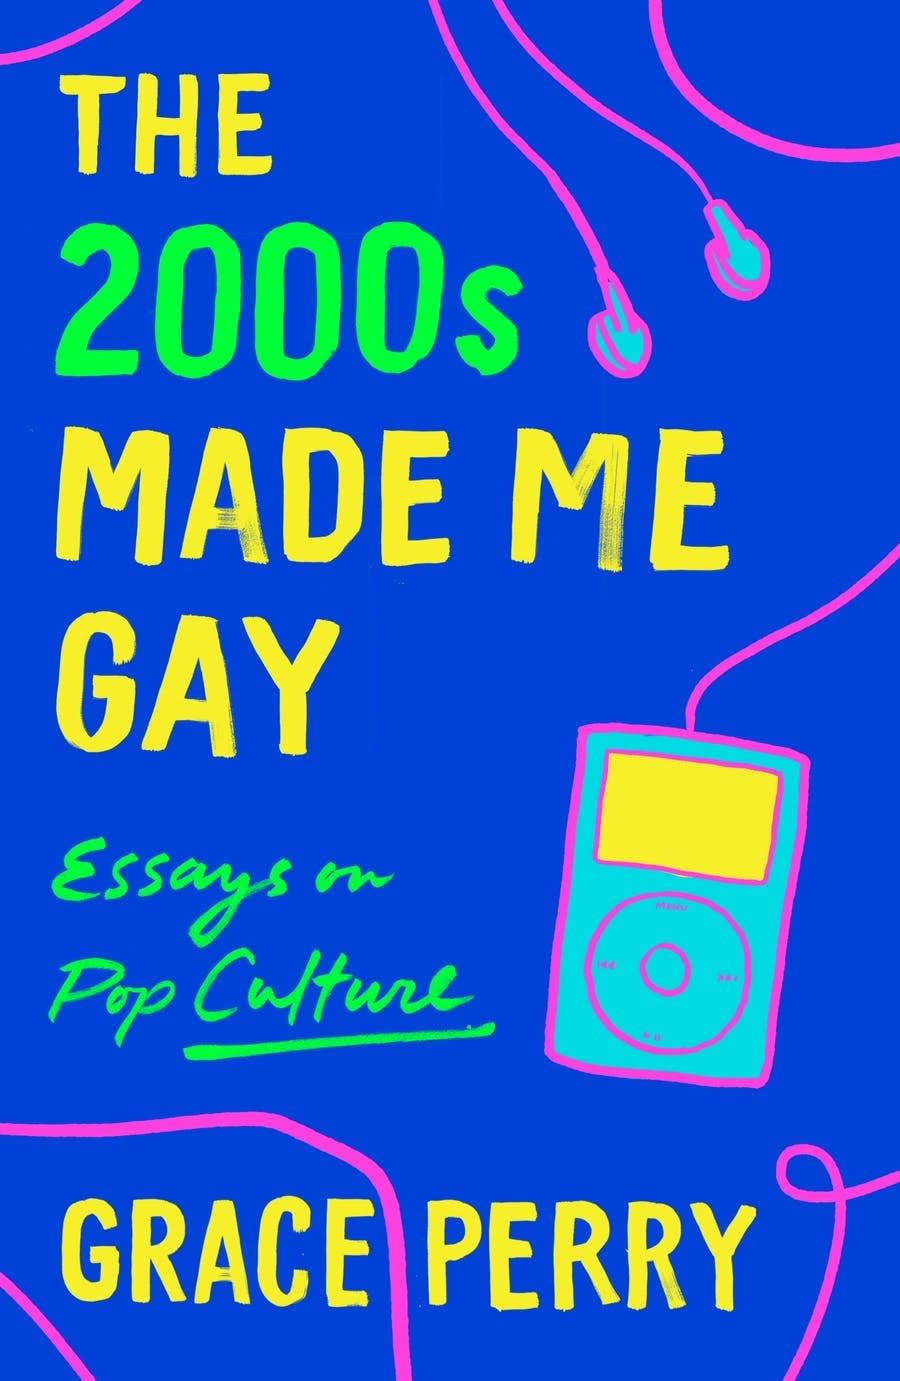 What it's about: This humorous essay collection from Grace Perry is the exploration of queer-coded pop culture in the early '00s. There weren't many overtly queer role models in popular culture, so we turned to things like Gossip Girl, Katy Perry, and the patron saint of Mean Girls, Lindsay Lohan, because they were subversive but still popular enough that it made us look “normal.” Perry’s pitch-perfect essays reminded me how hilarious this was, while making me glad we finally have authentic queer representation in mainstream culture. If you’re too young to know what I’m talking about, come take a walk down memory lane, and be glad you didn’t have to grow up during this truly demented moment in pop culture. Get it from Bookshop or your local bookstore via Indiebound here. 